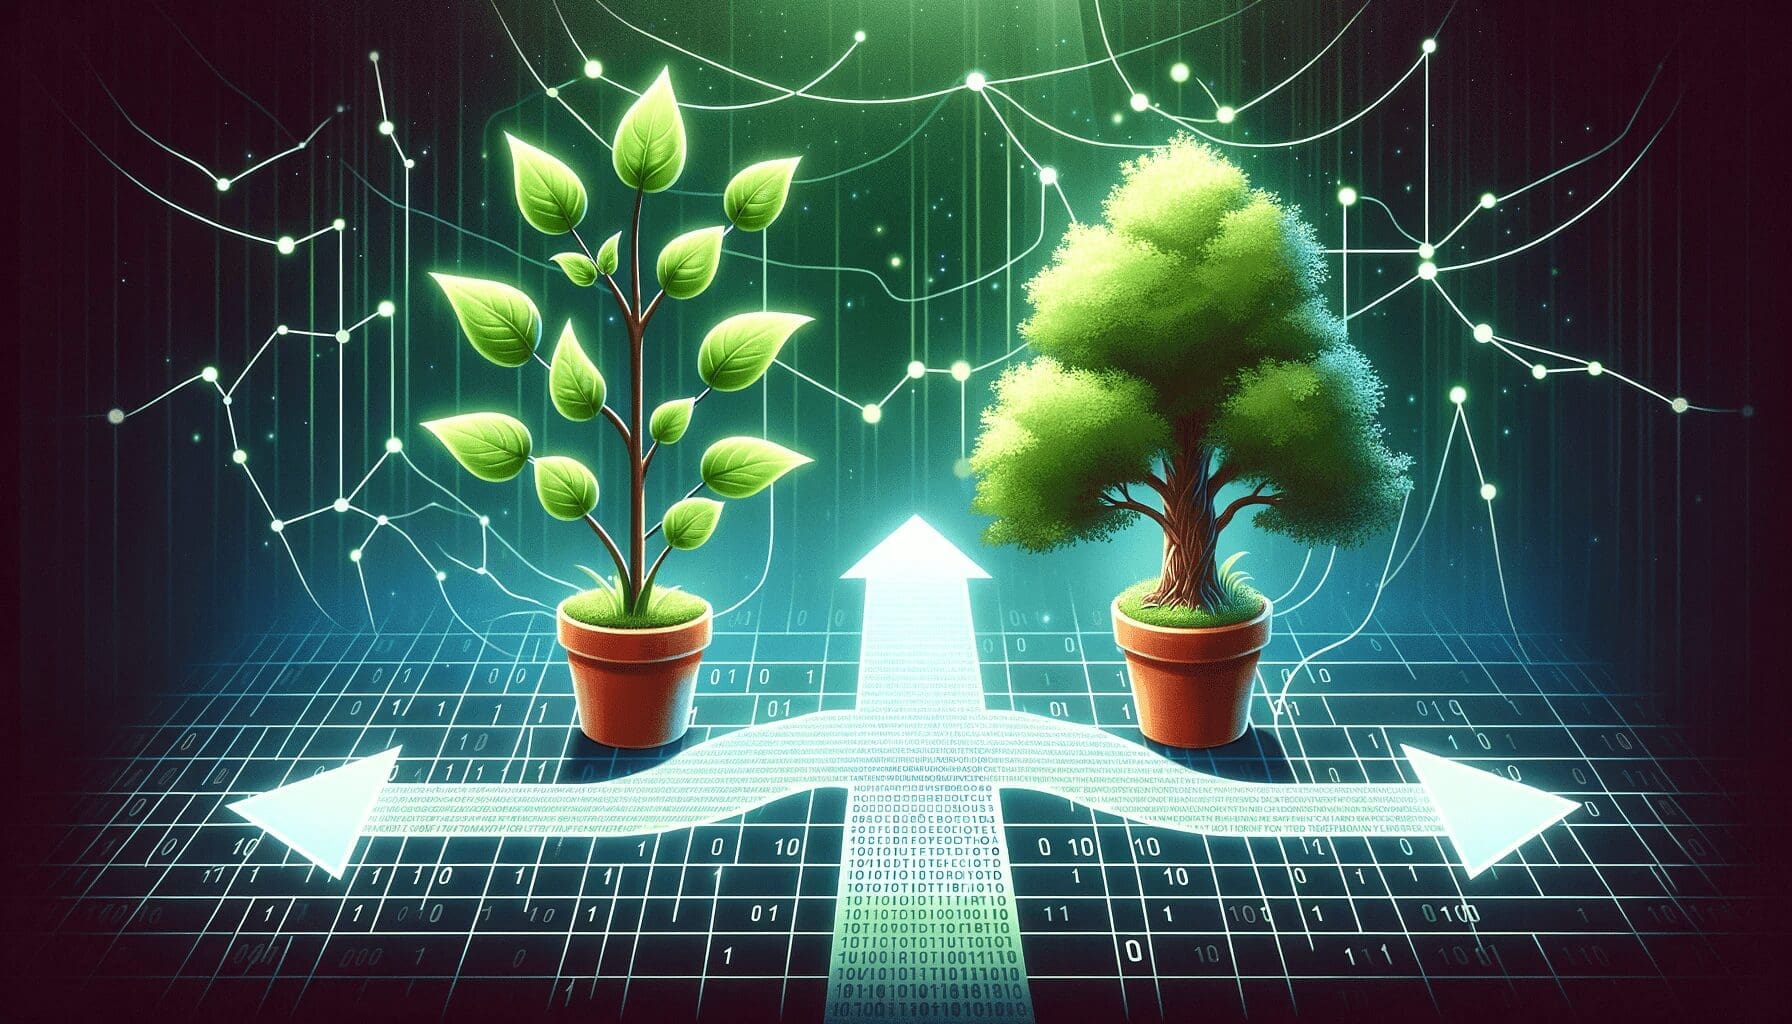 Image represents new visitors as a sprouting plant and returning visitors as a mature tree, with a path of digital binary code between them, set against a background of interconnected lines